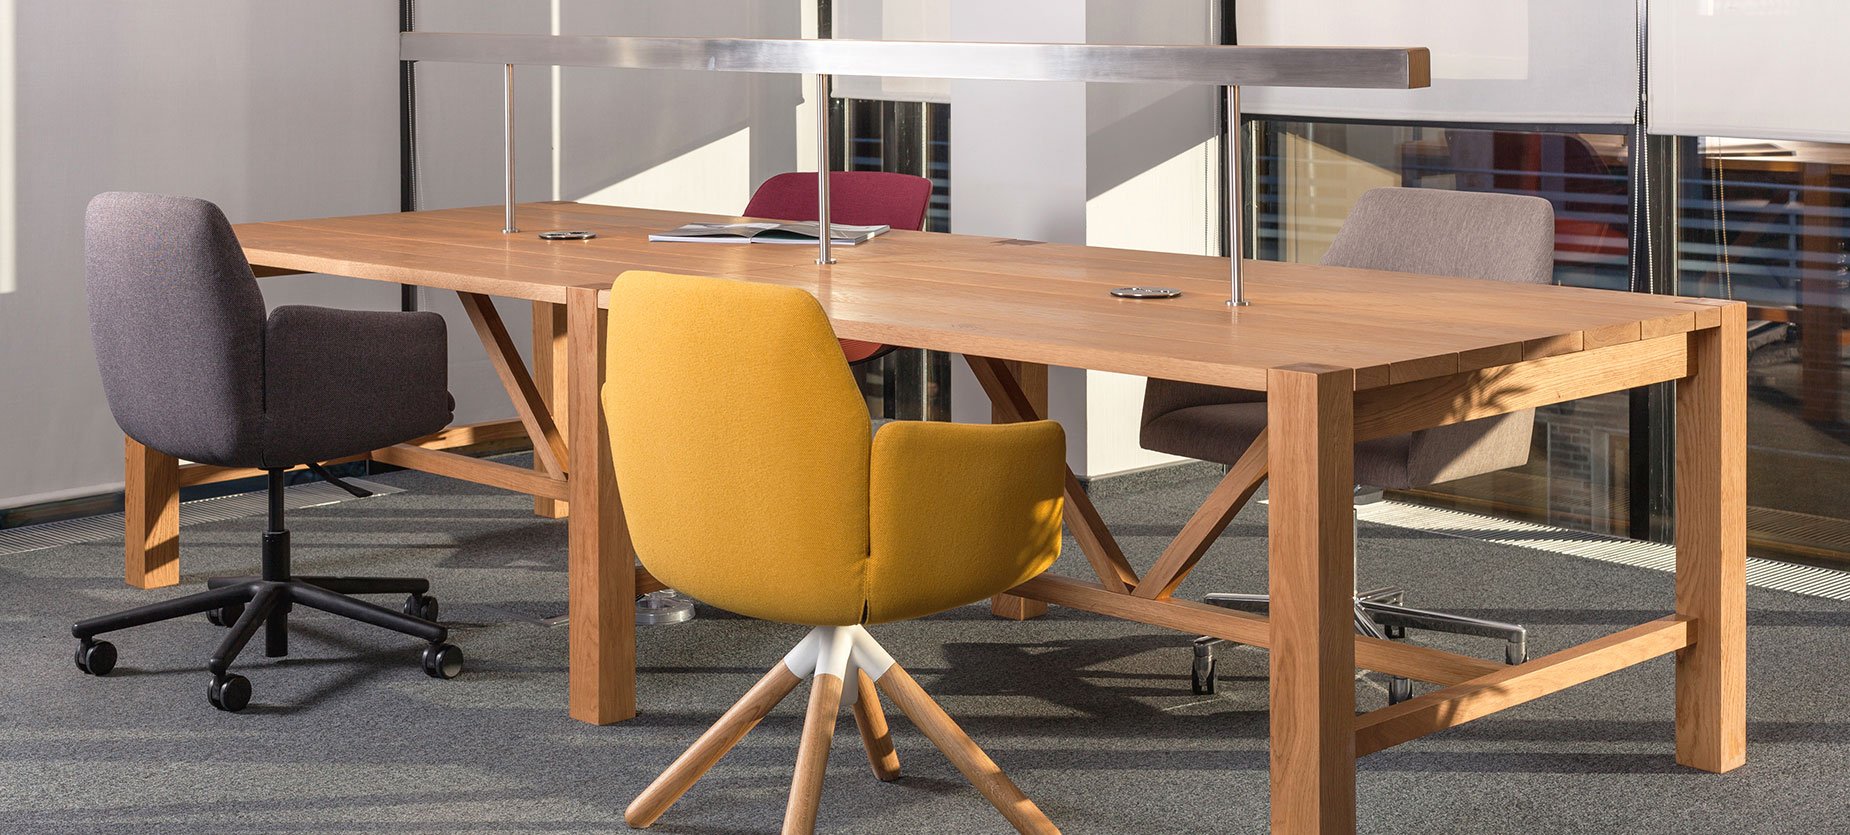 This unassigned workspace meets needs for short-term individual or collaborative tasks. Poppy chairs set the mood here, adding warmth and a residential feel to the space.